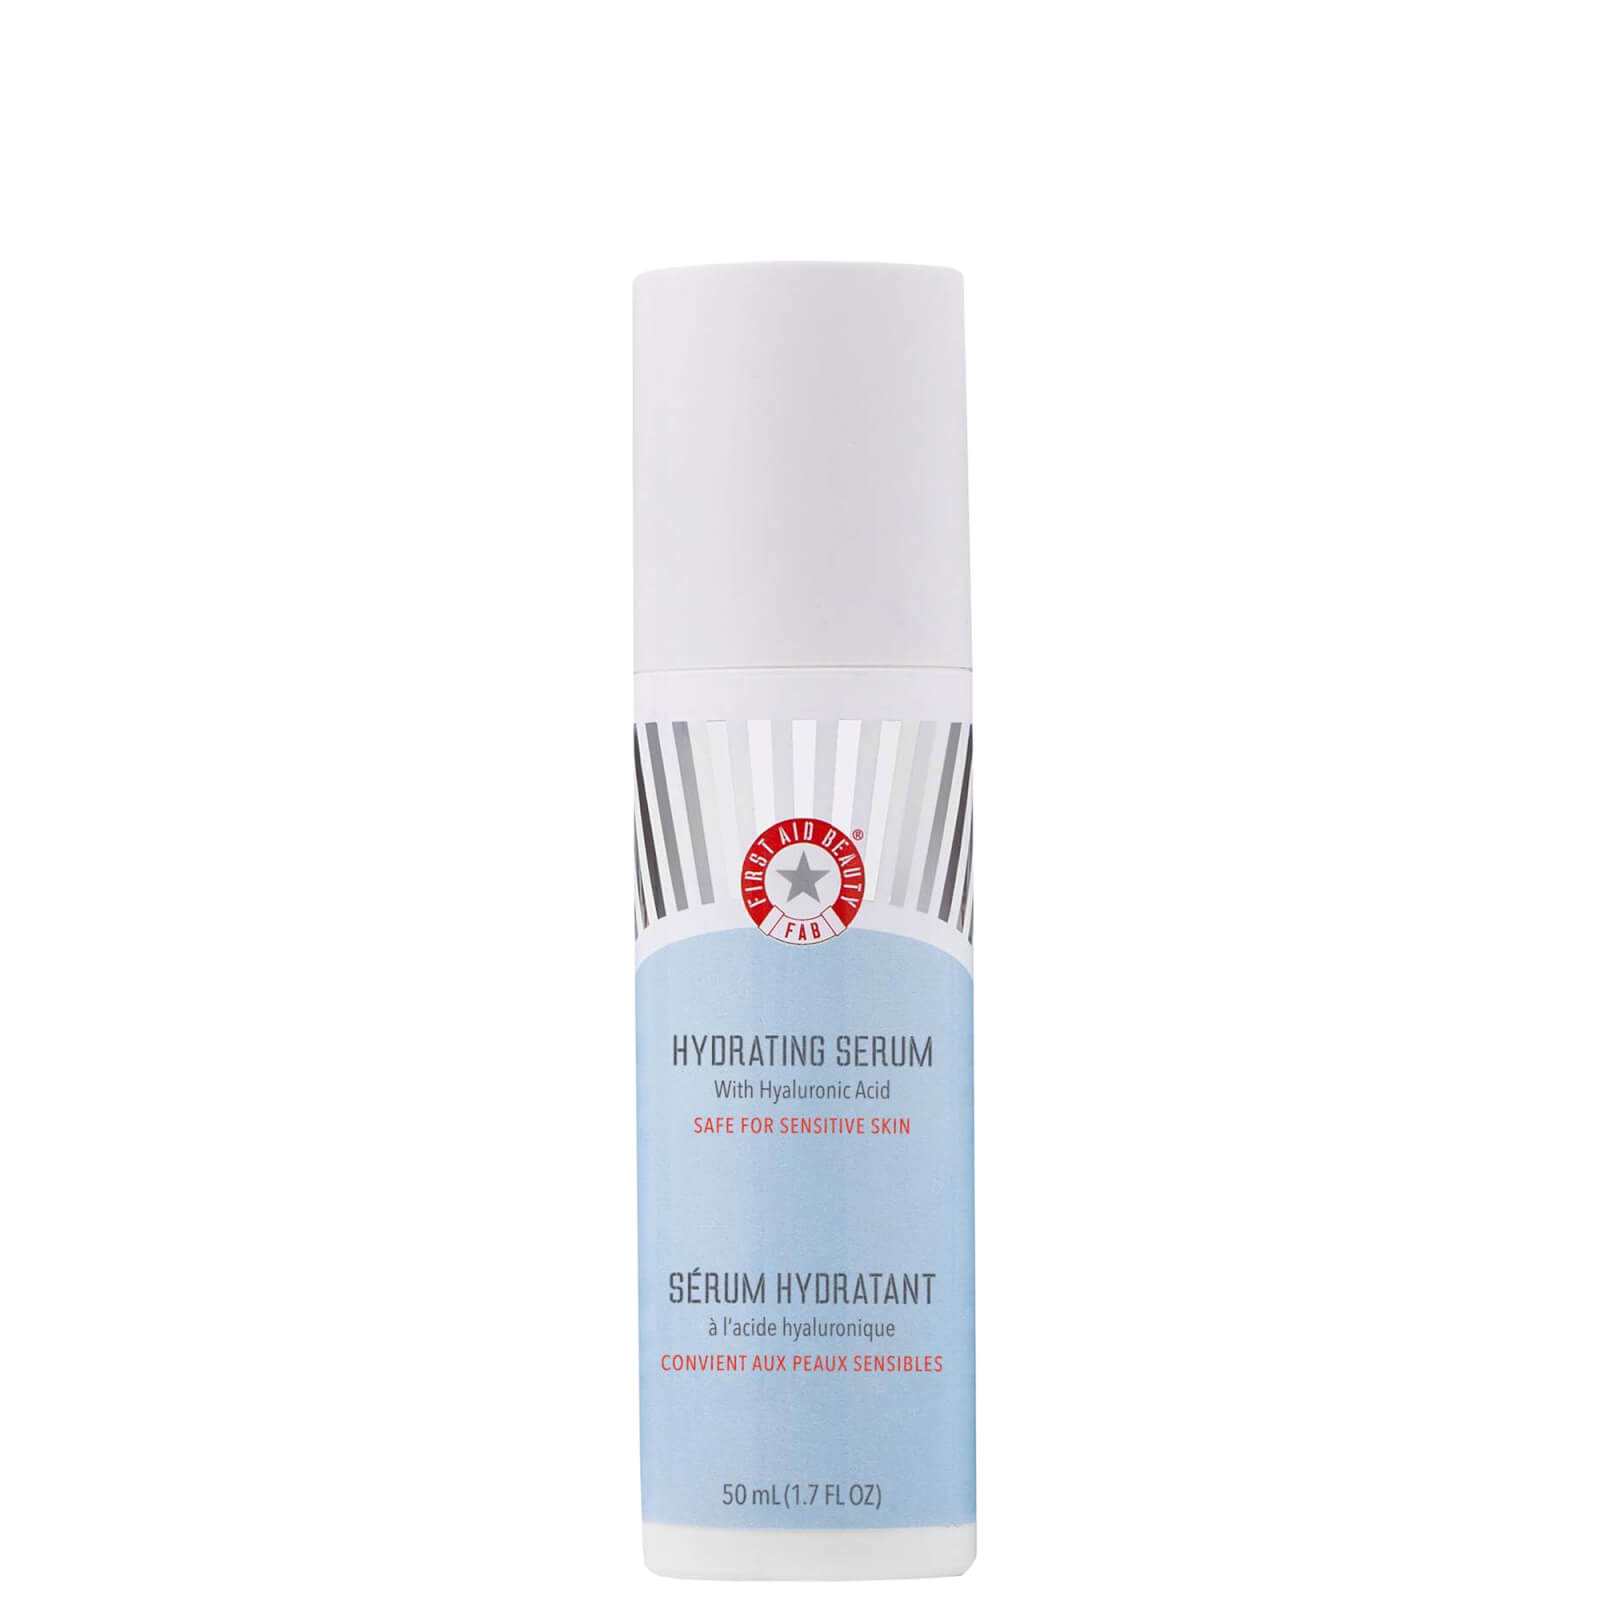 Image of First Aid Beauty Hydrating Serum with Hyaluronic Acid 50ml